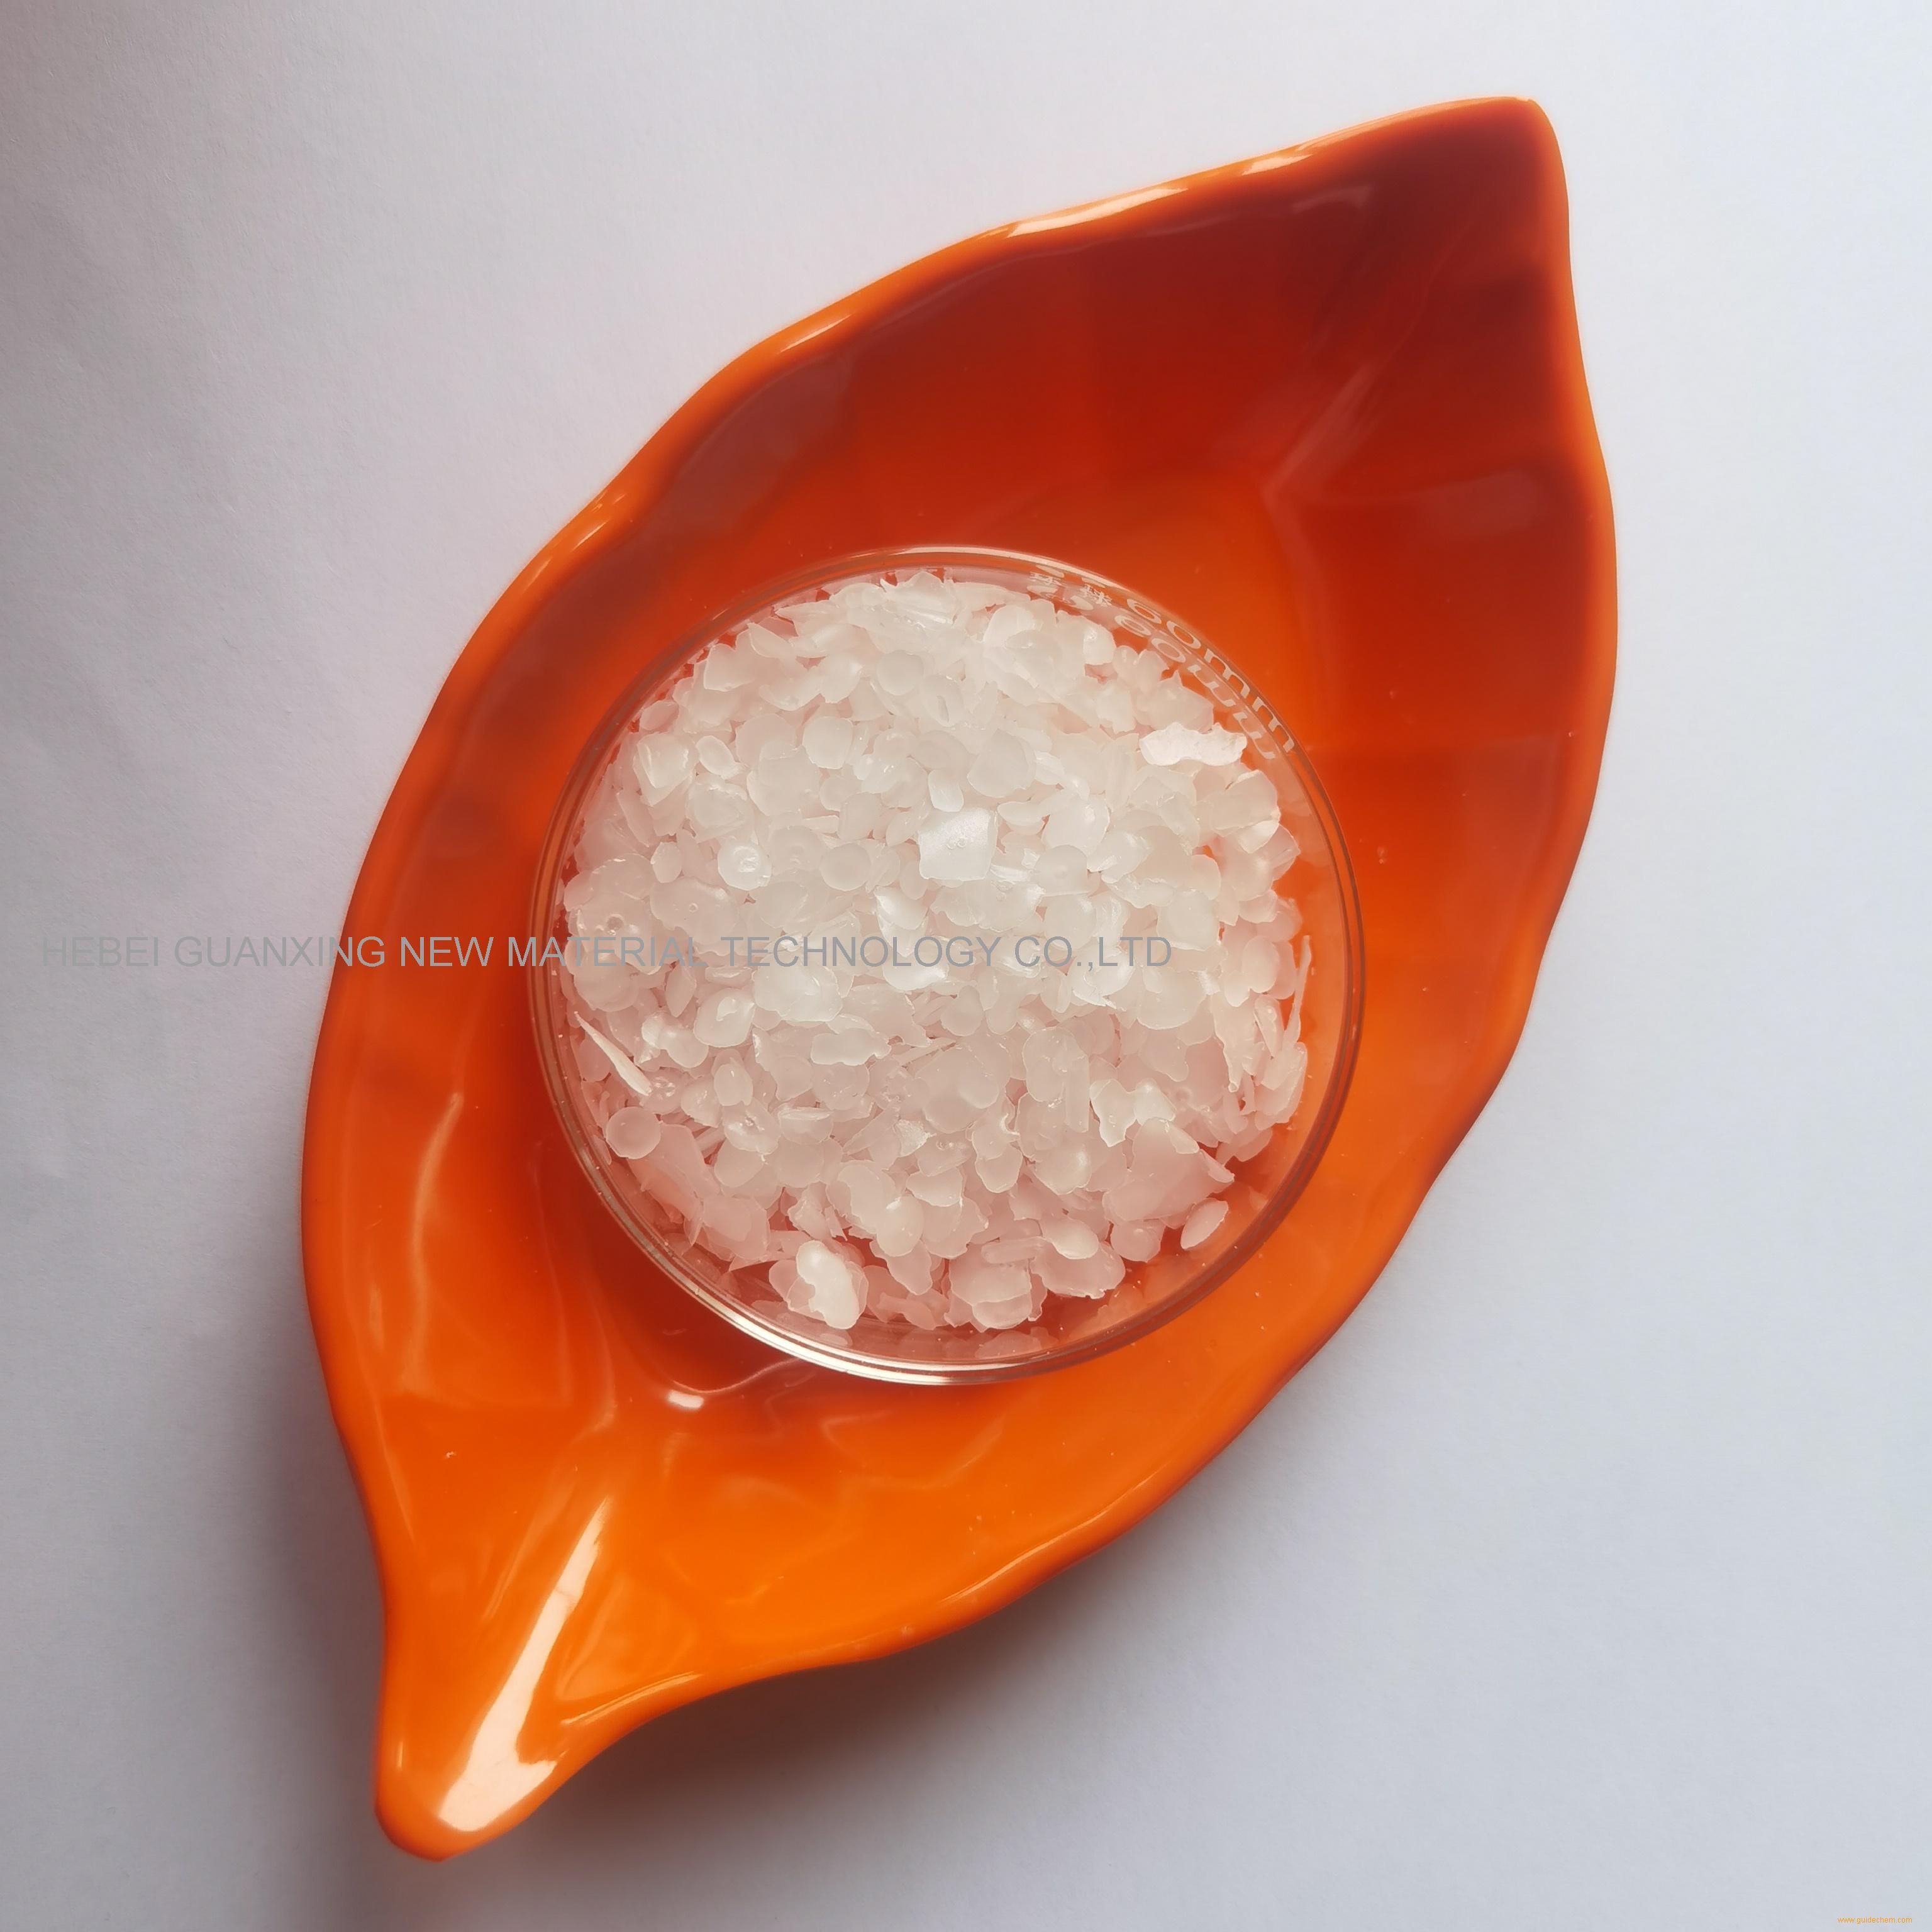 58/60 Fully Refined Paraffin Wax Industrial Candle Solid Paraffin